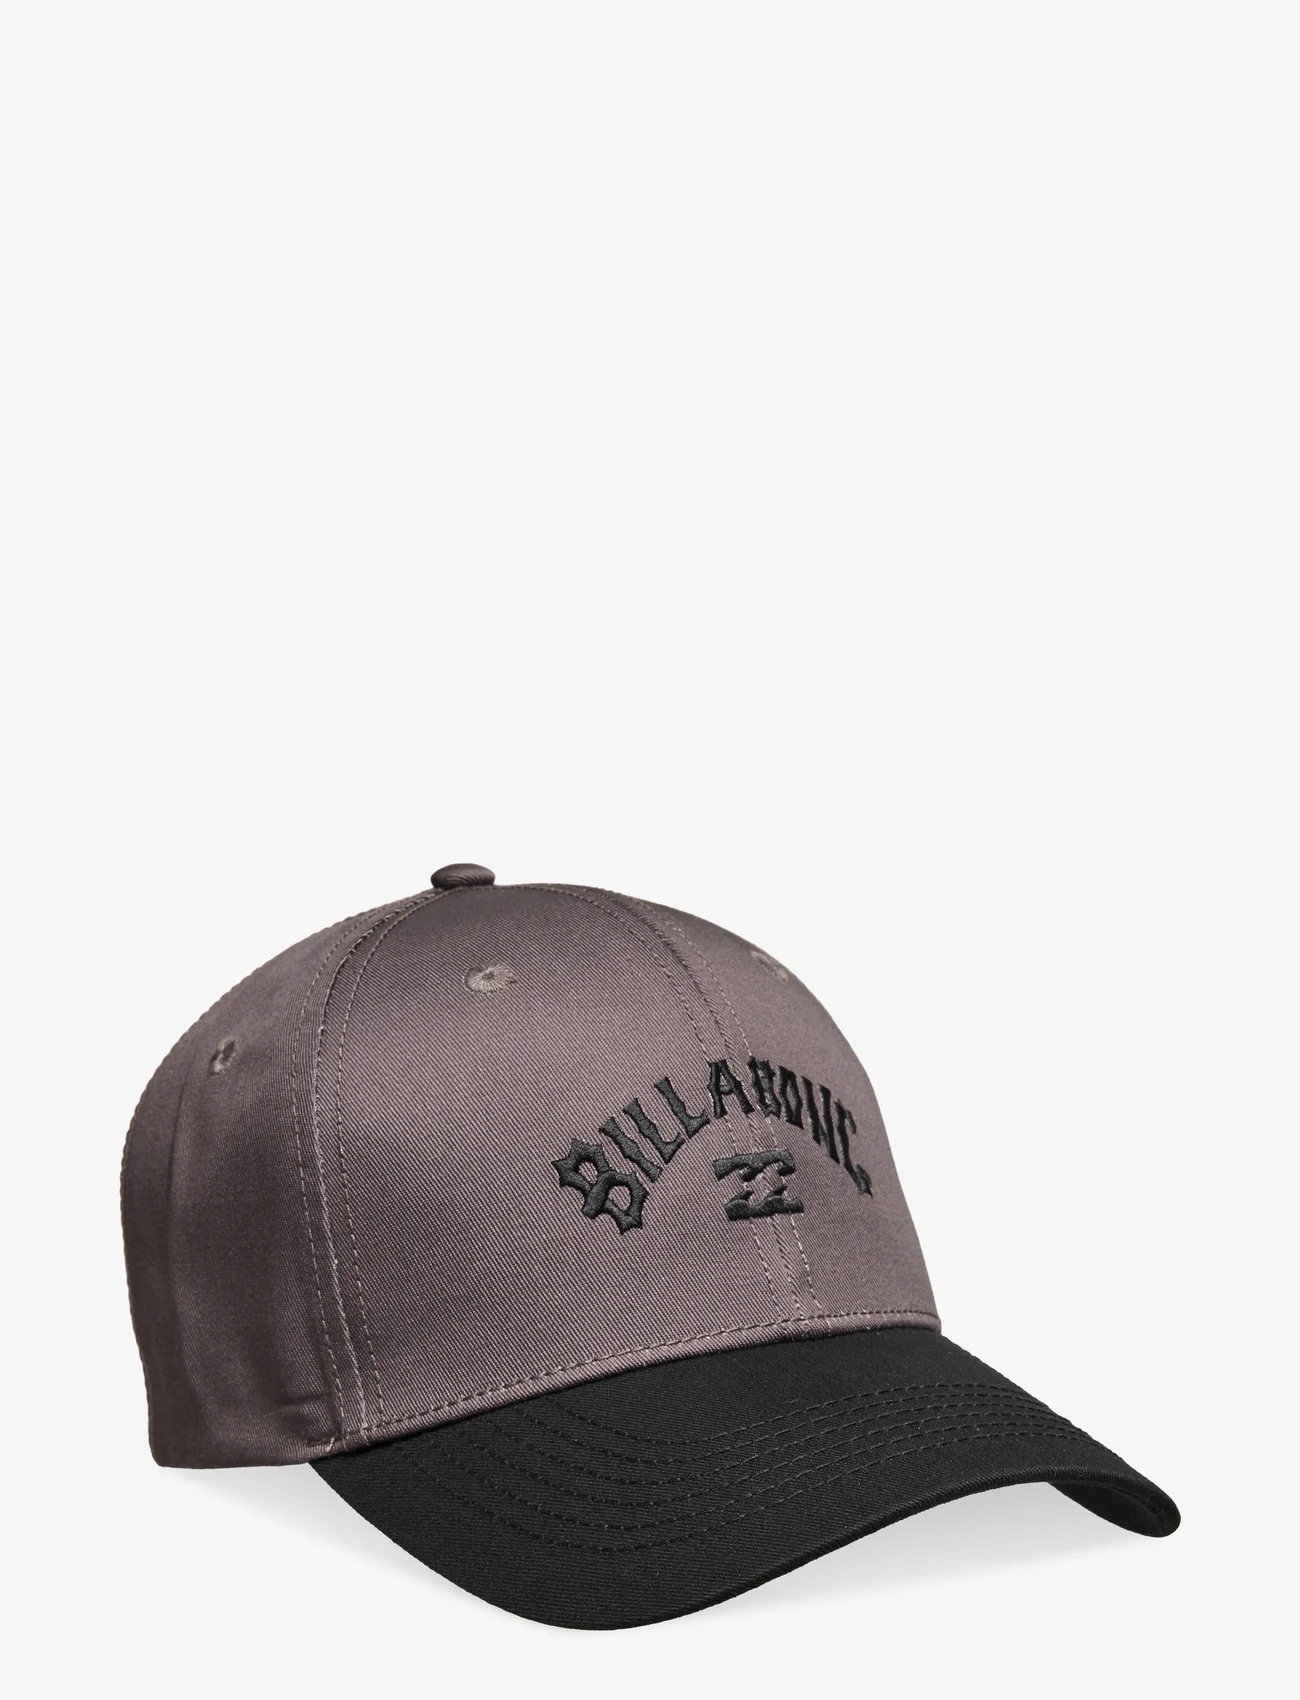 Billabong - ARCH SNAPBACK - lowest prices - char - 0